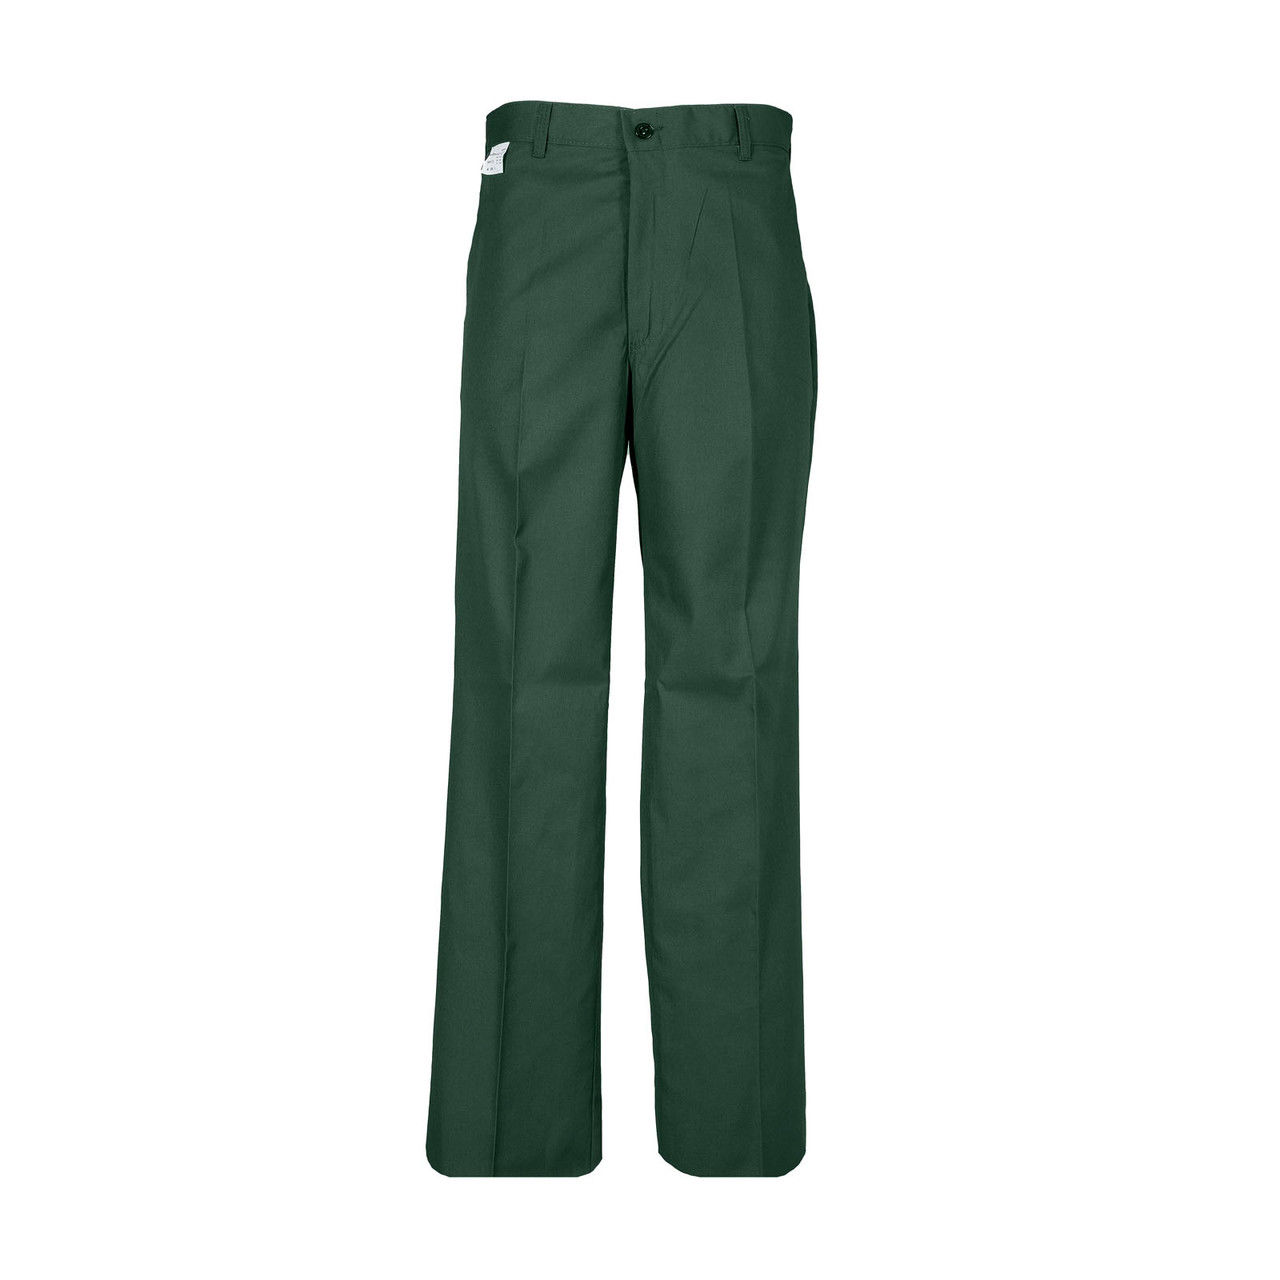 What are suitable pairings for these spruce green work pants?